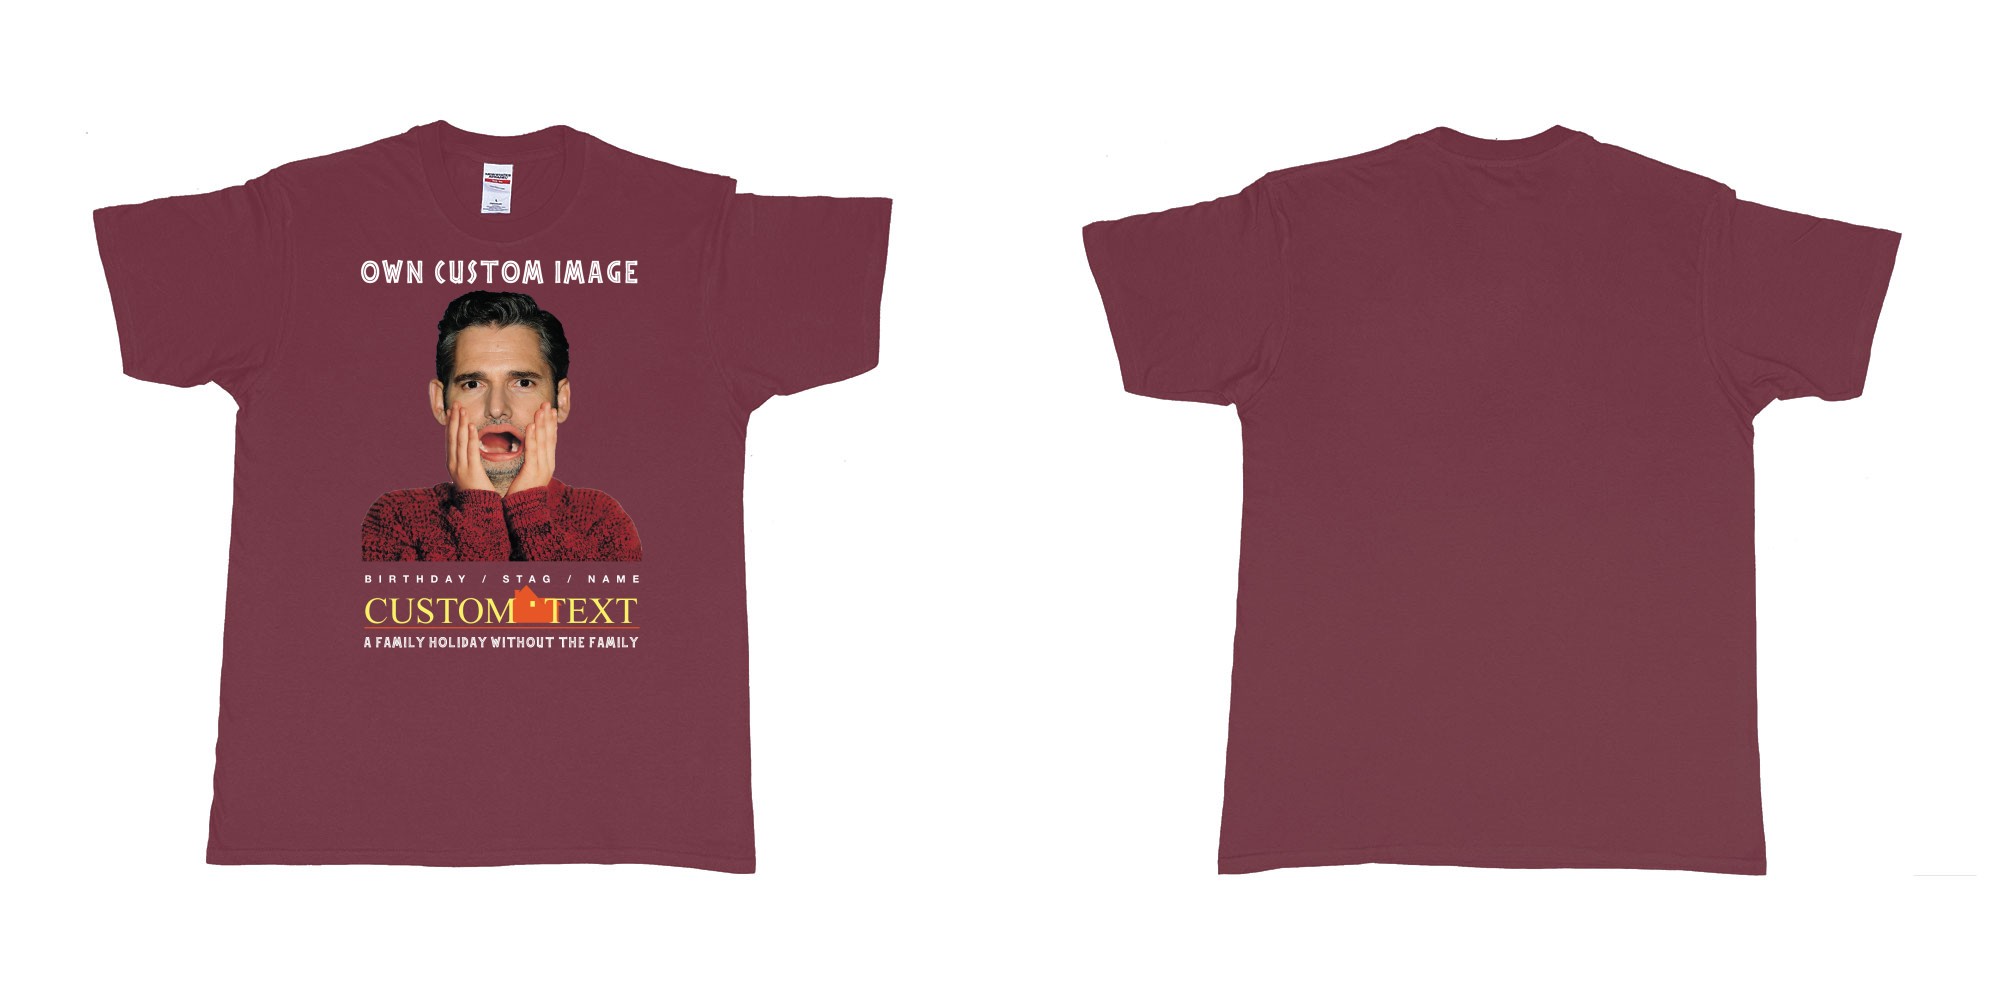 Custom tshirt design home alone custom image in fabric color marron choice your own text made in Bali by The Pirate Way